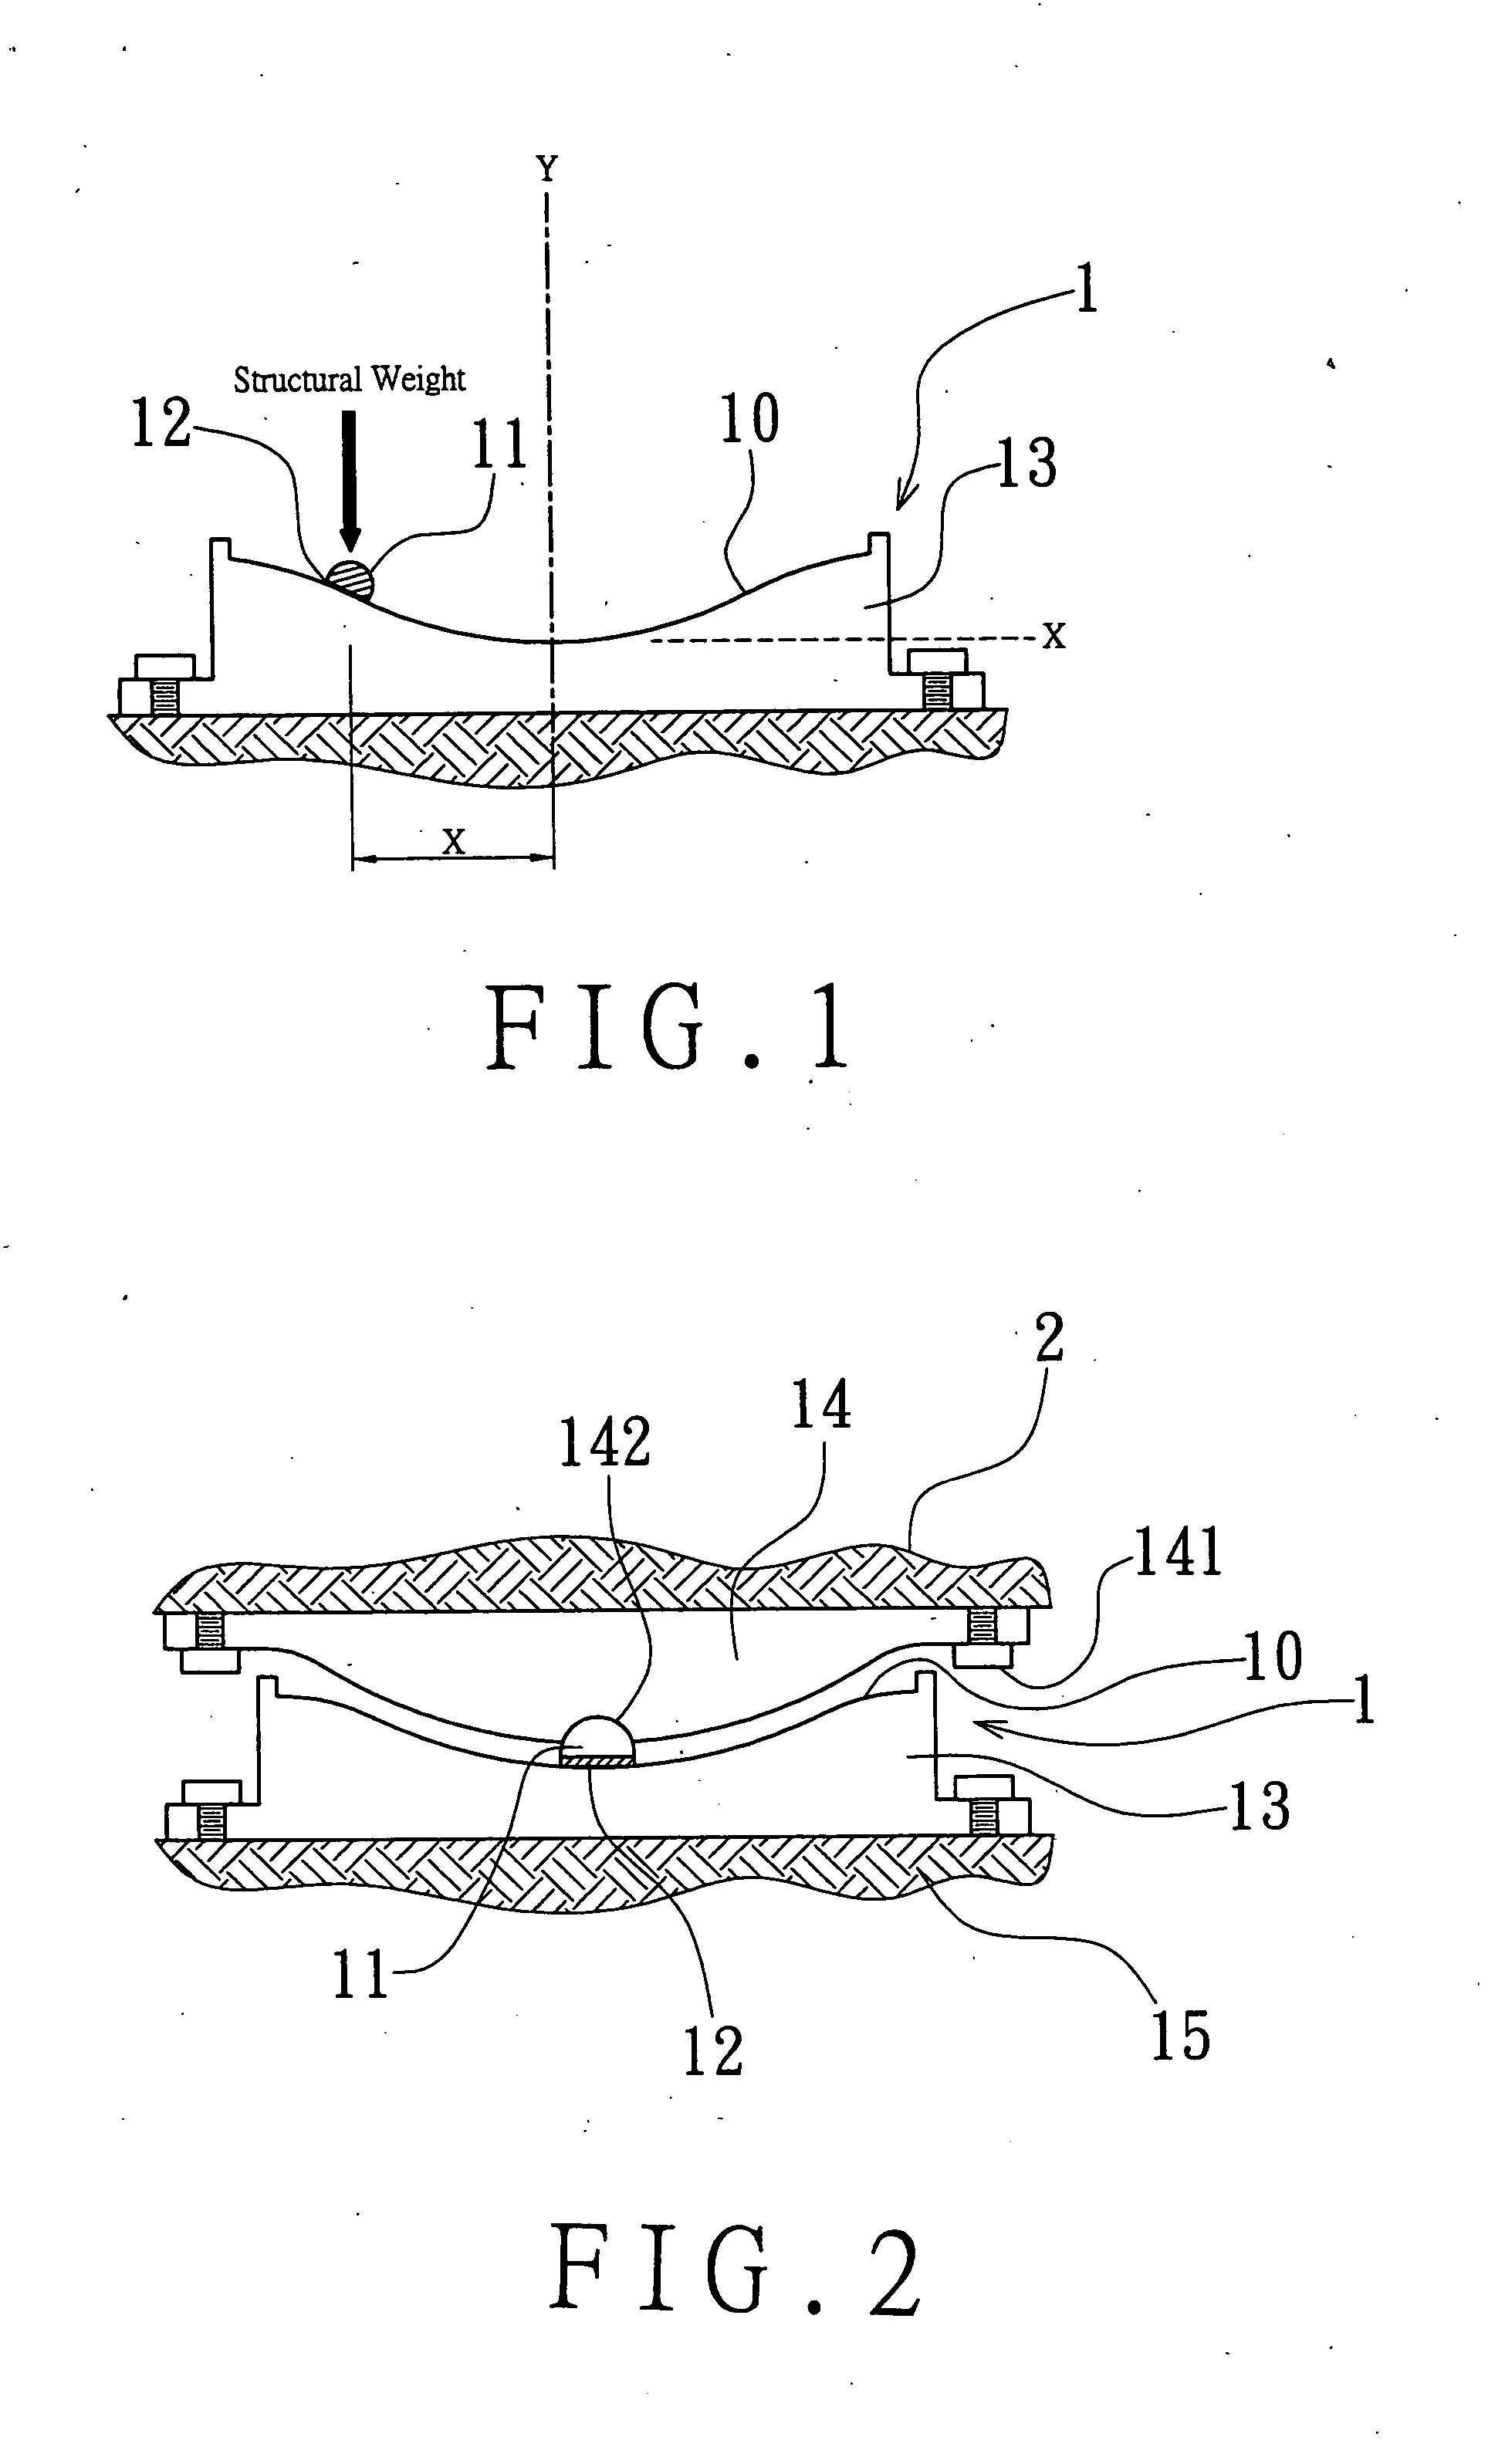 Seismic isolator with variable curvature